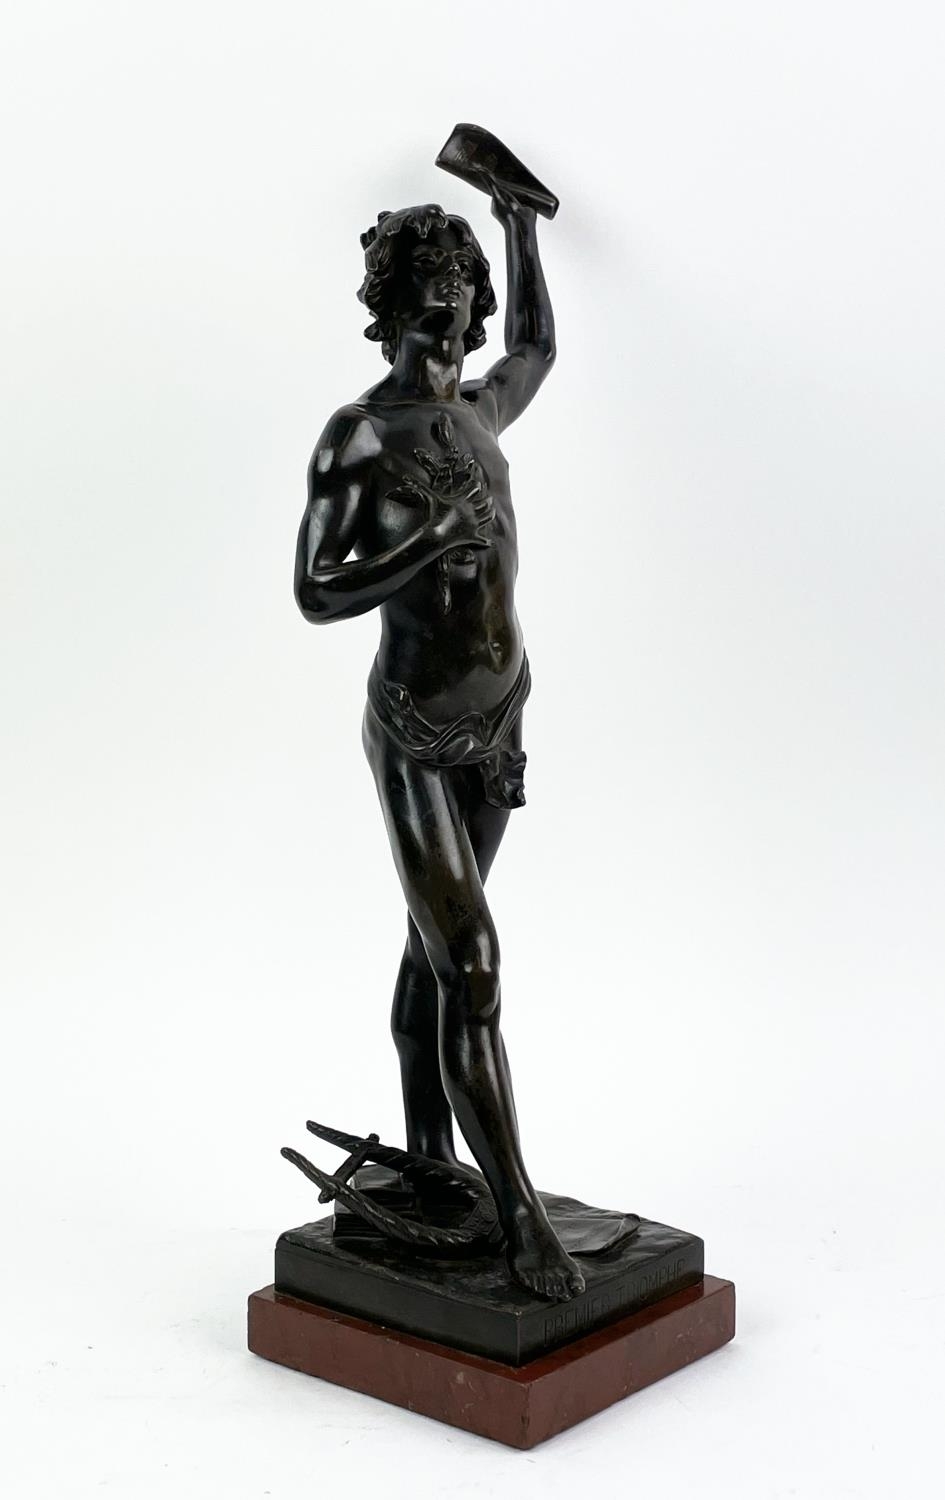 BRONZE FIGURE, ANGLES CANE (1859-1911), 'Premier triumphe', mounted on a rouge marble plinth base, - Image 2 of 8